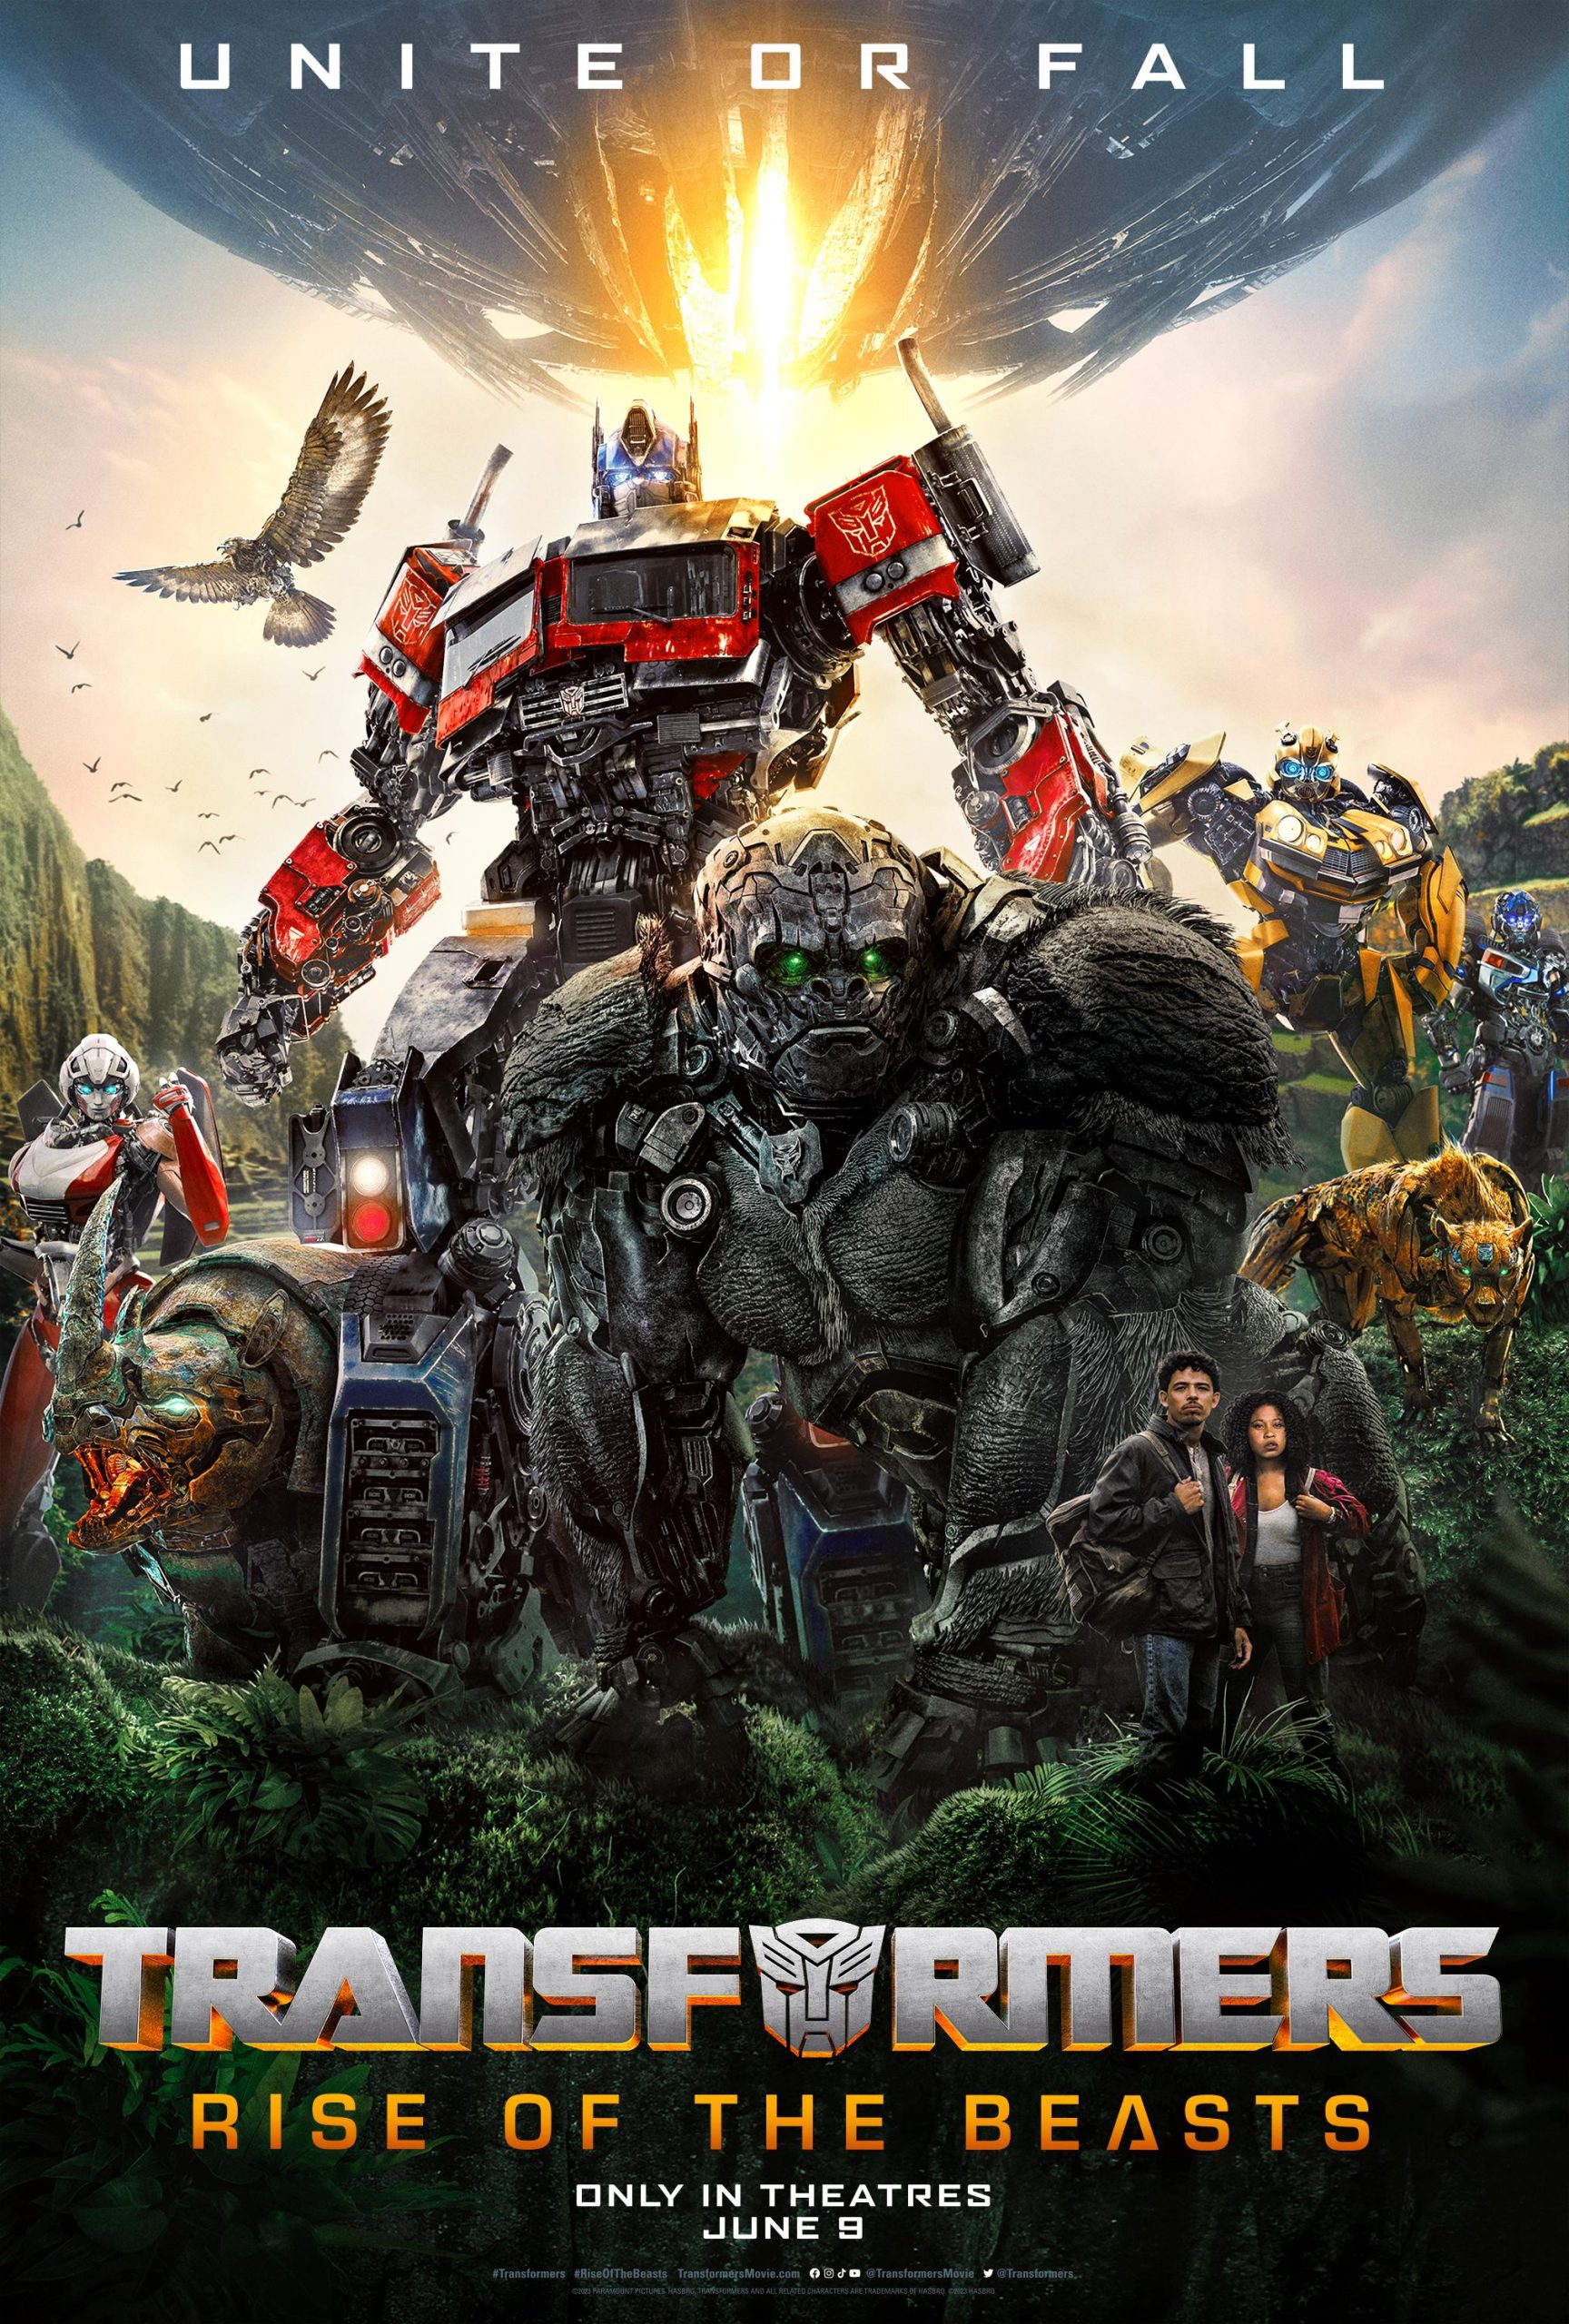 Movie Poster: Transformers: Rise of the Beasts